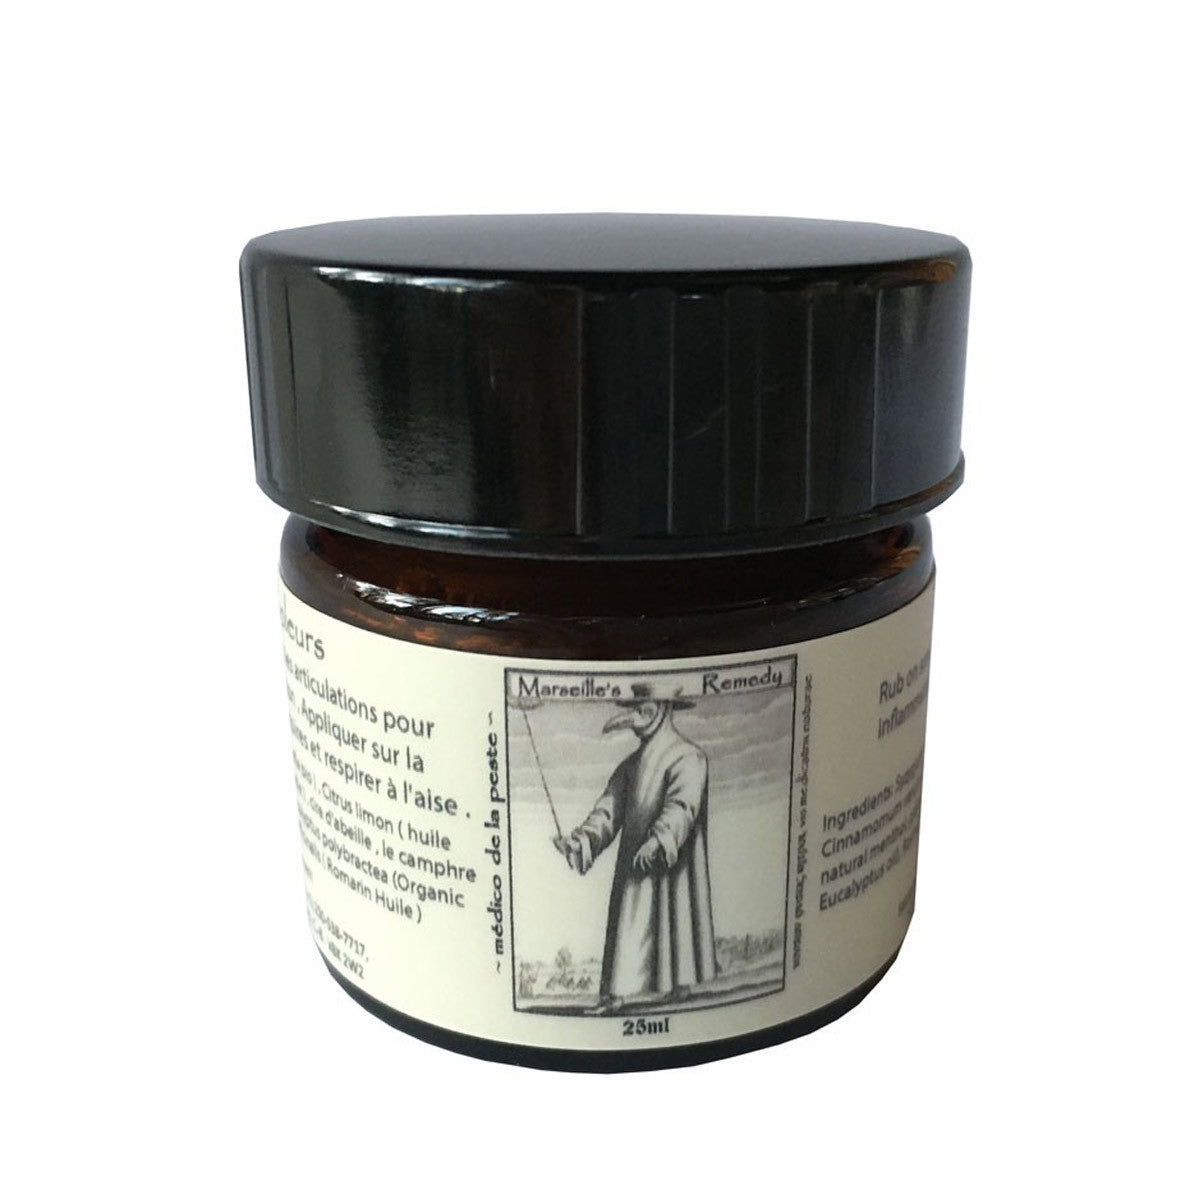 Primary image of Marseille's Remedy Traditional Thieves' Balm